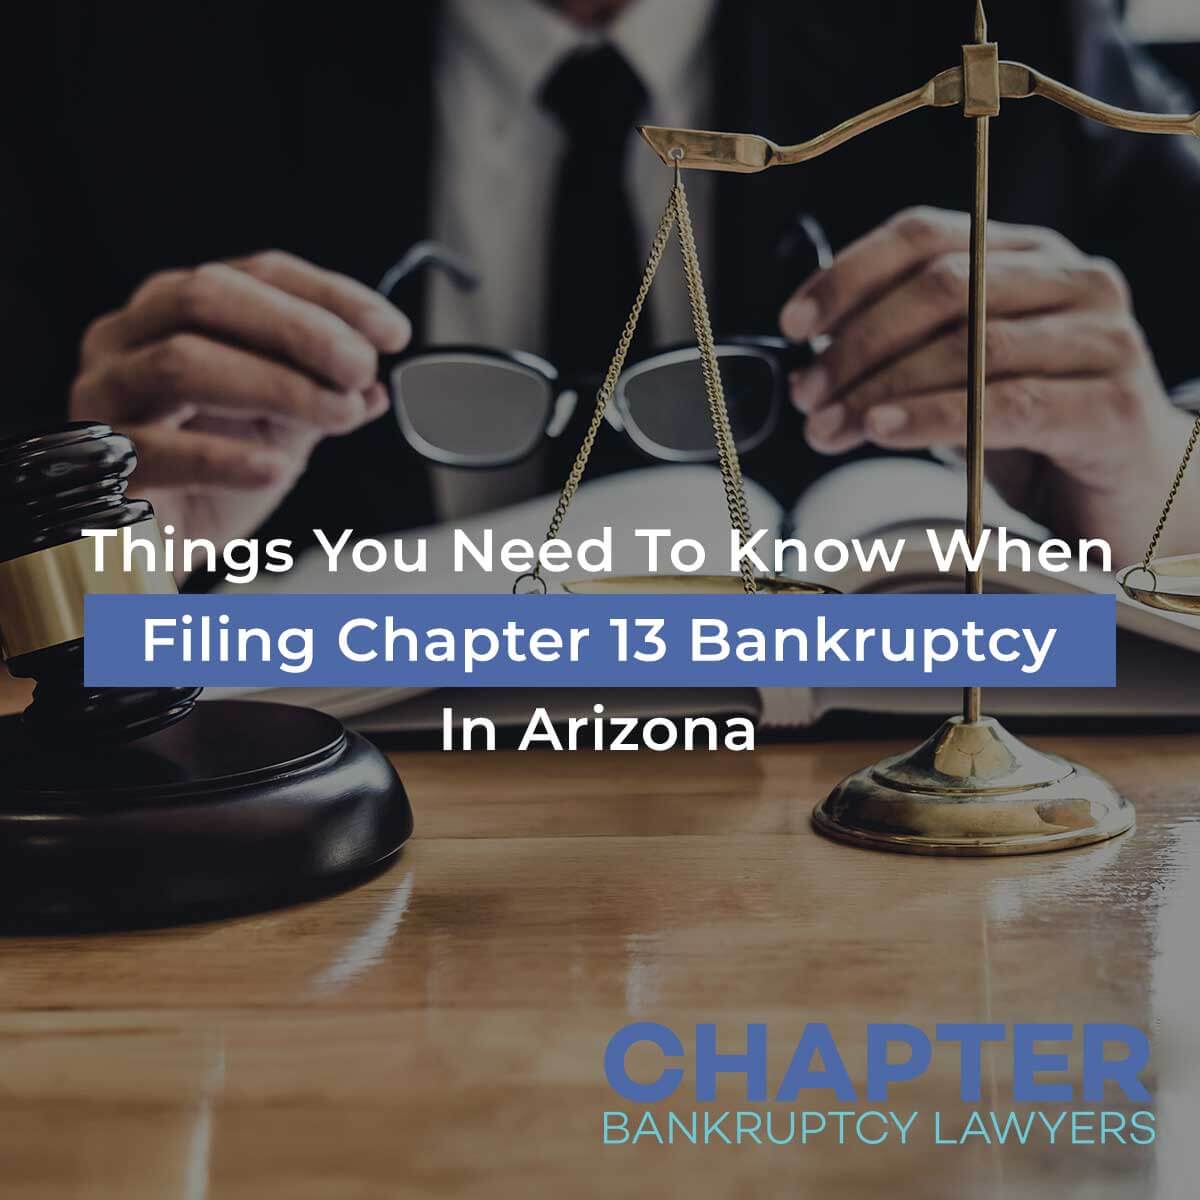 Things You Need To Know When Filing Chapter 13 Bankruptcy In Arizona